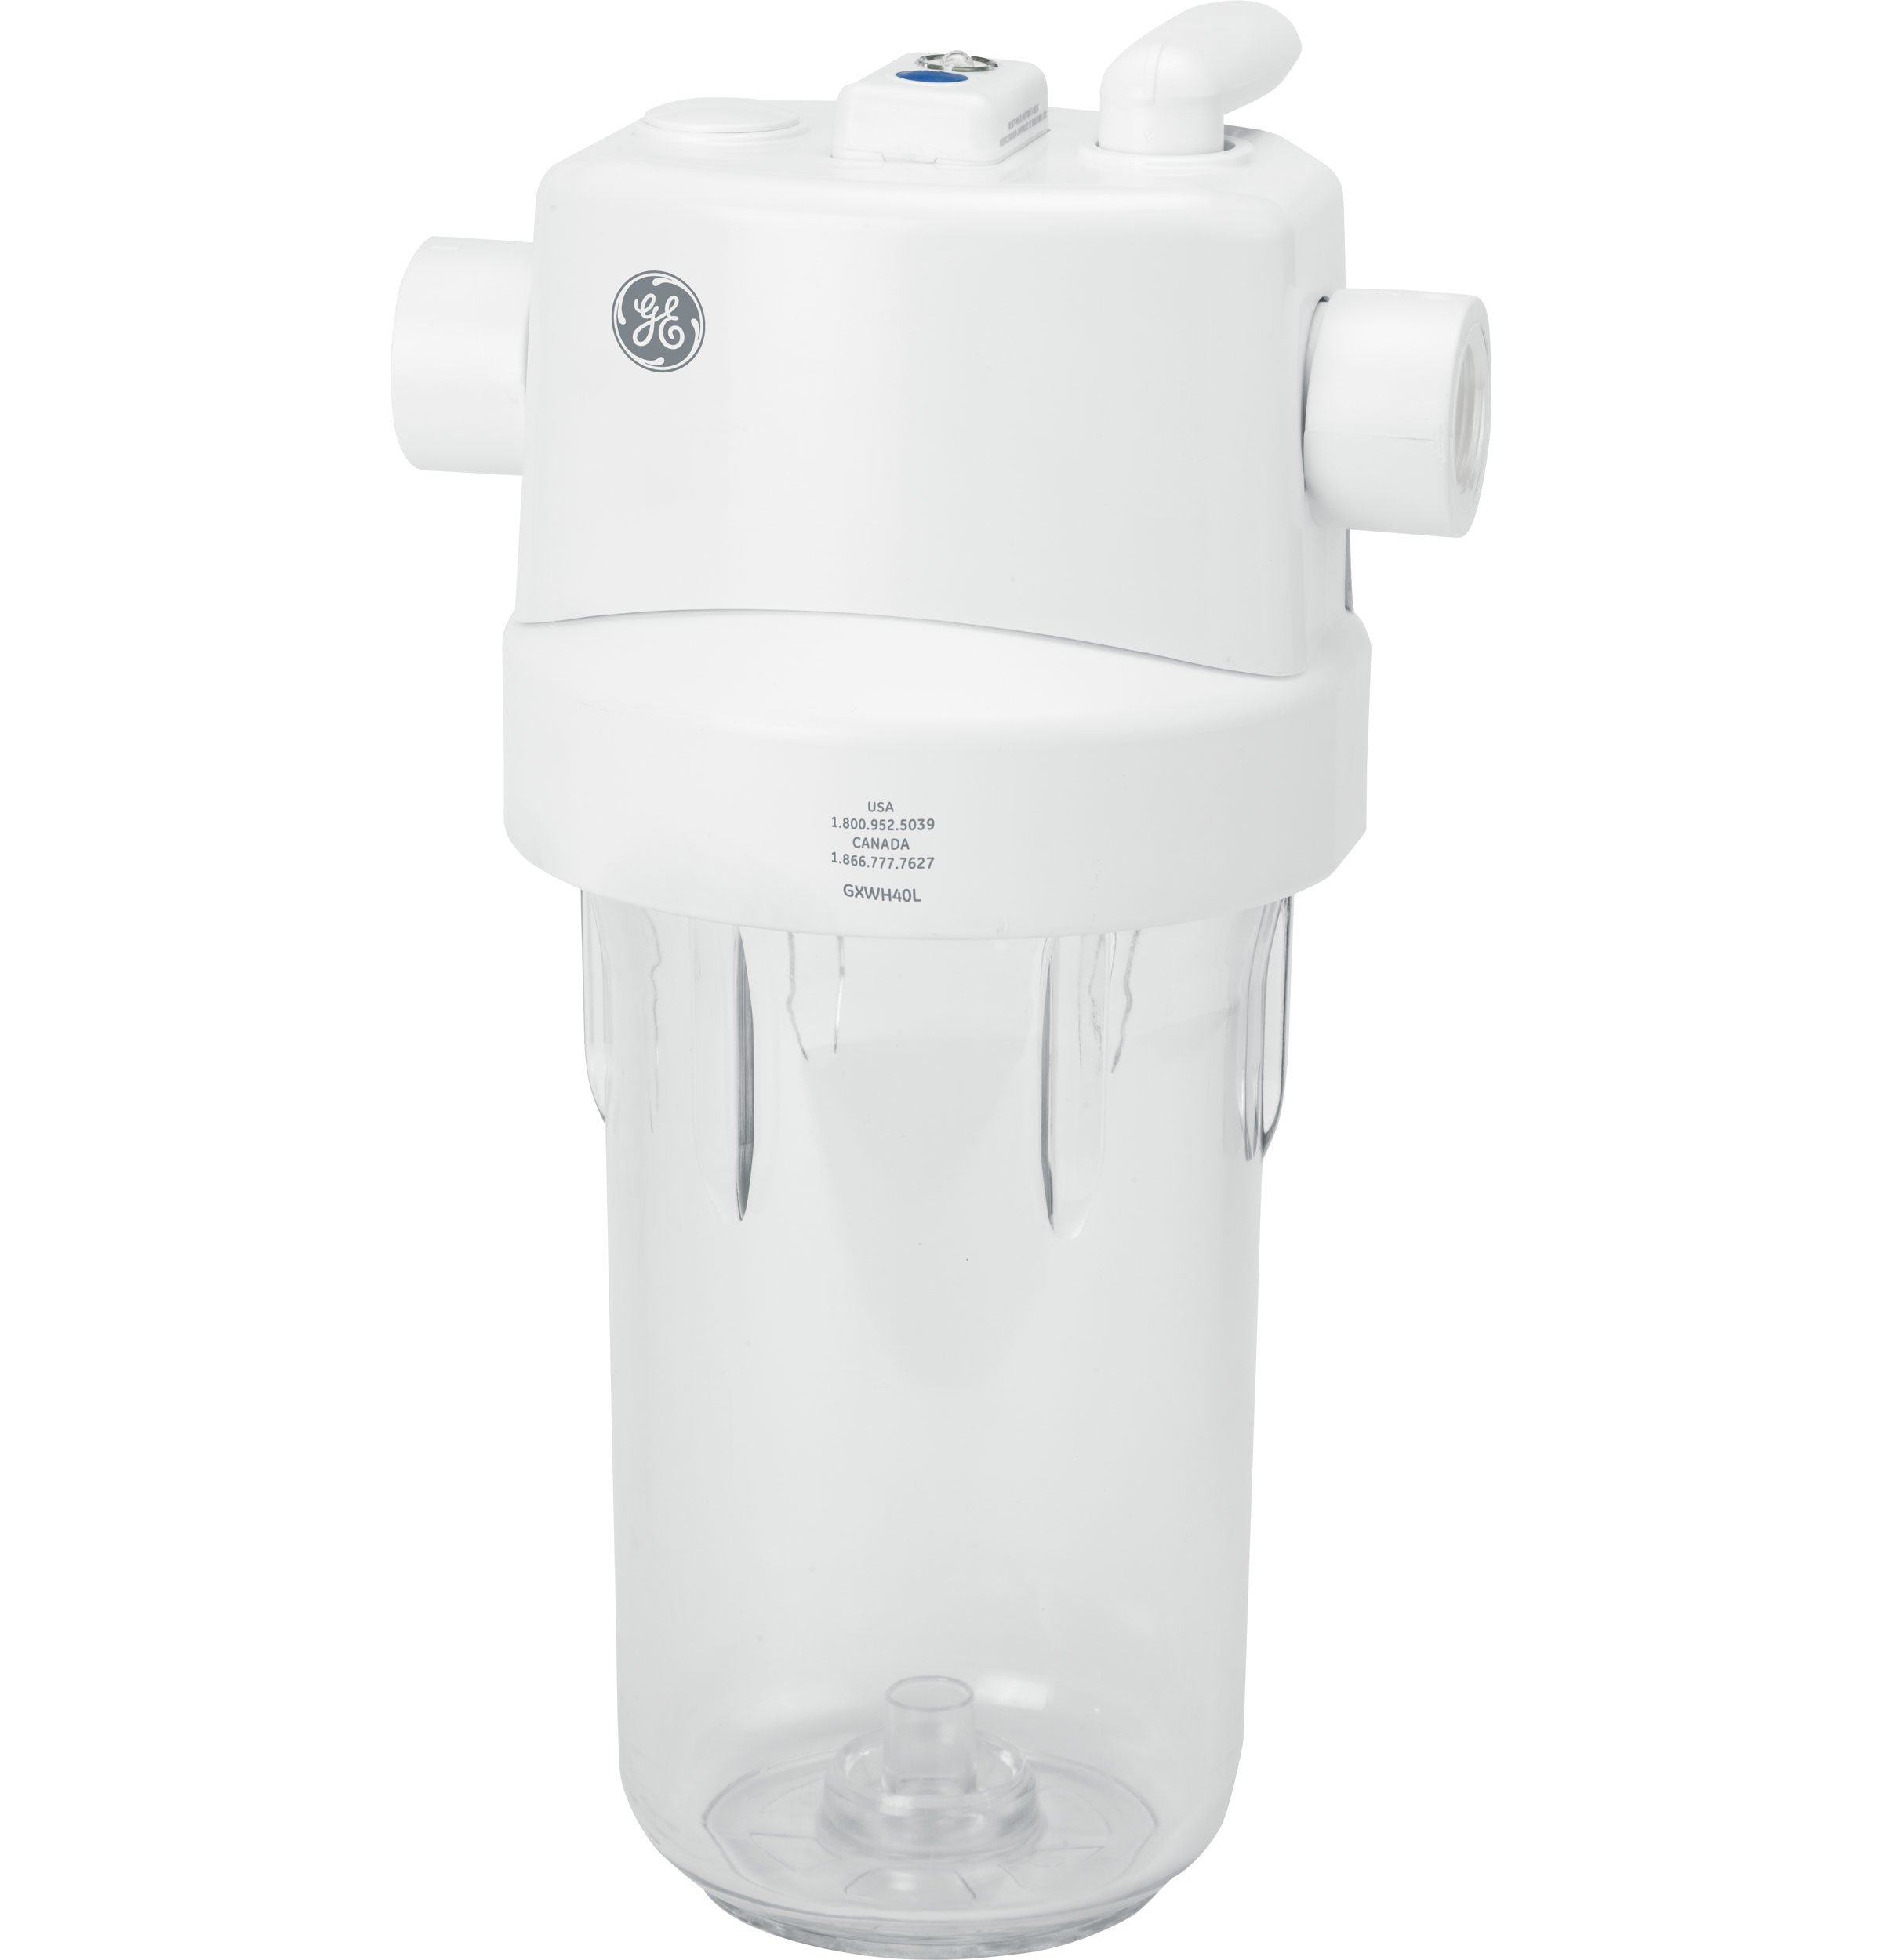 GE Whole House Water Filtration System | Reduces Sediment, Rust & More | Install Kit & Accessories Included | Filter Not Included | Replace Filters (FXHTC, FXHSC) Every 3 Months | GXWH40L